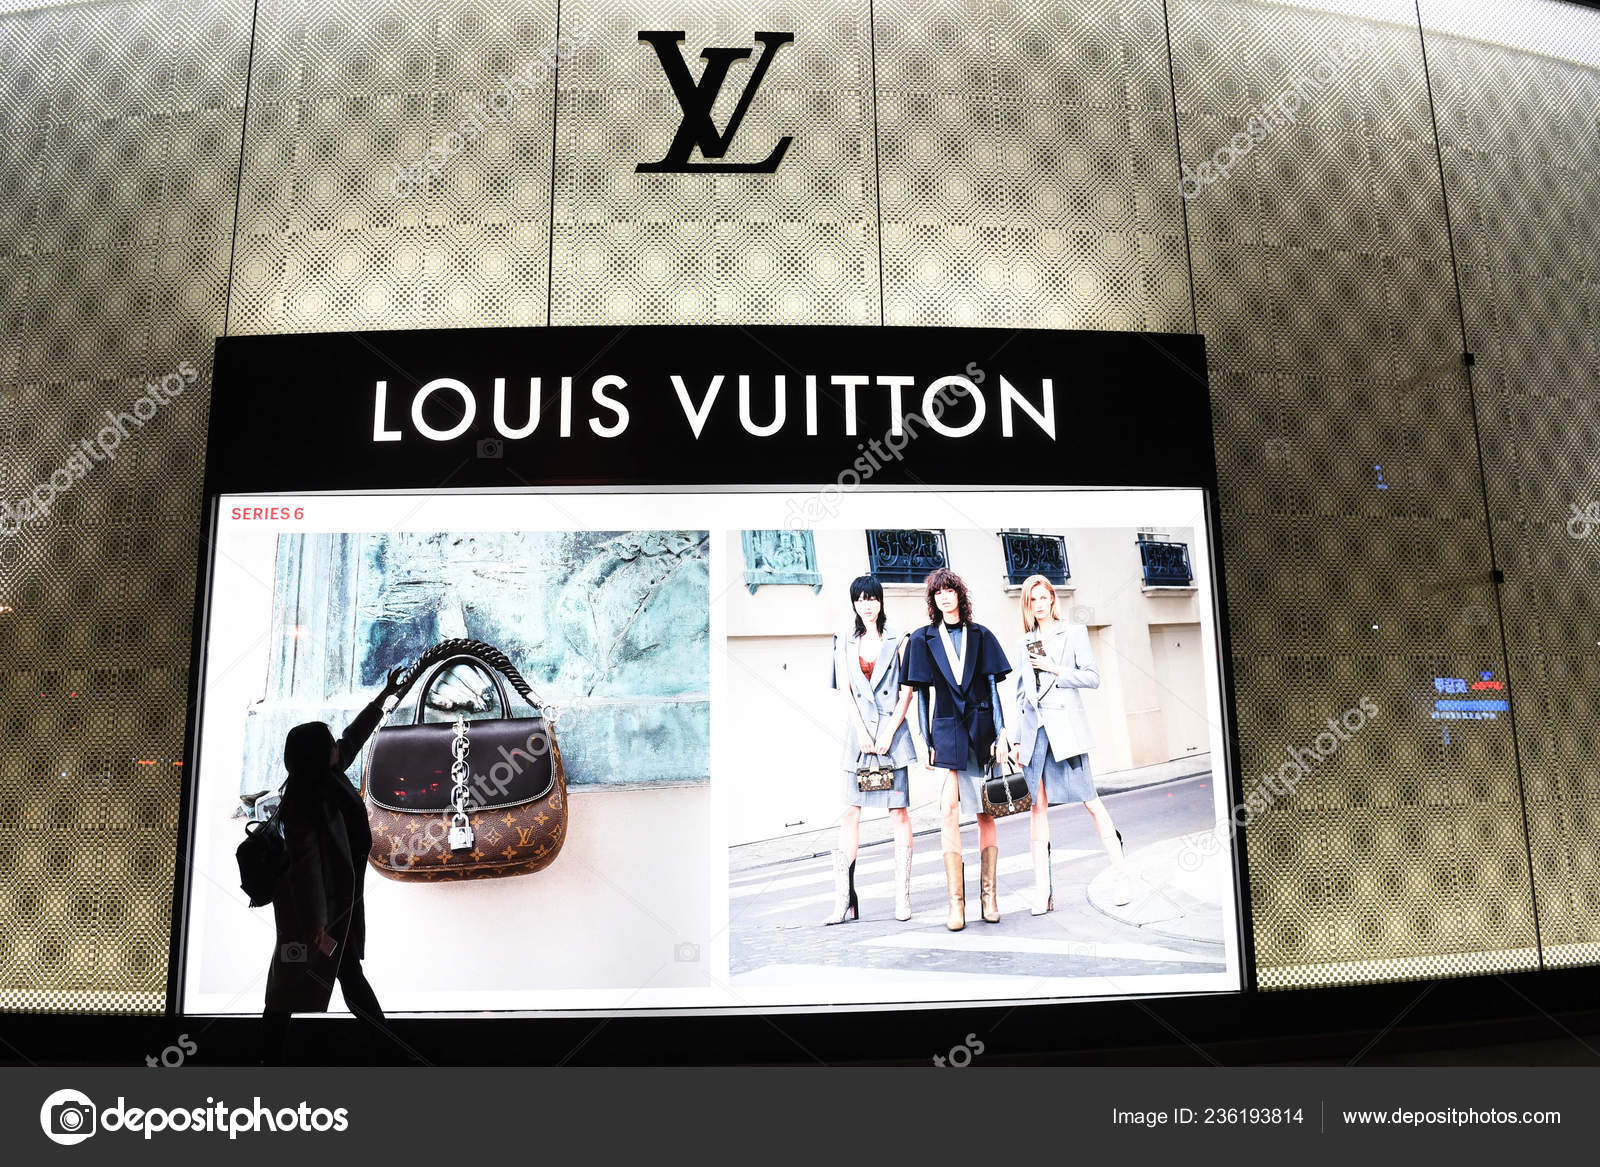 File--View of a Louis Vuitton (LV) store in Shanghai, China, 30